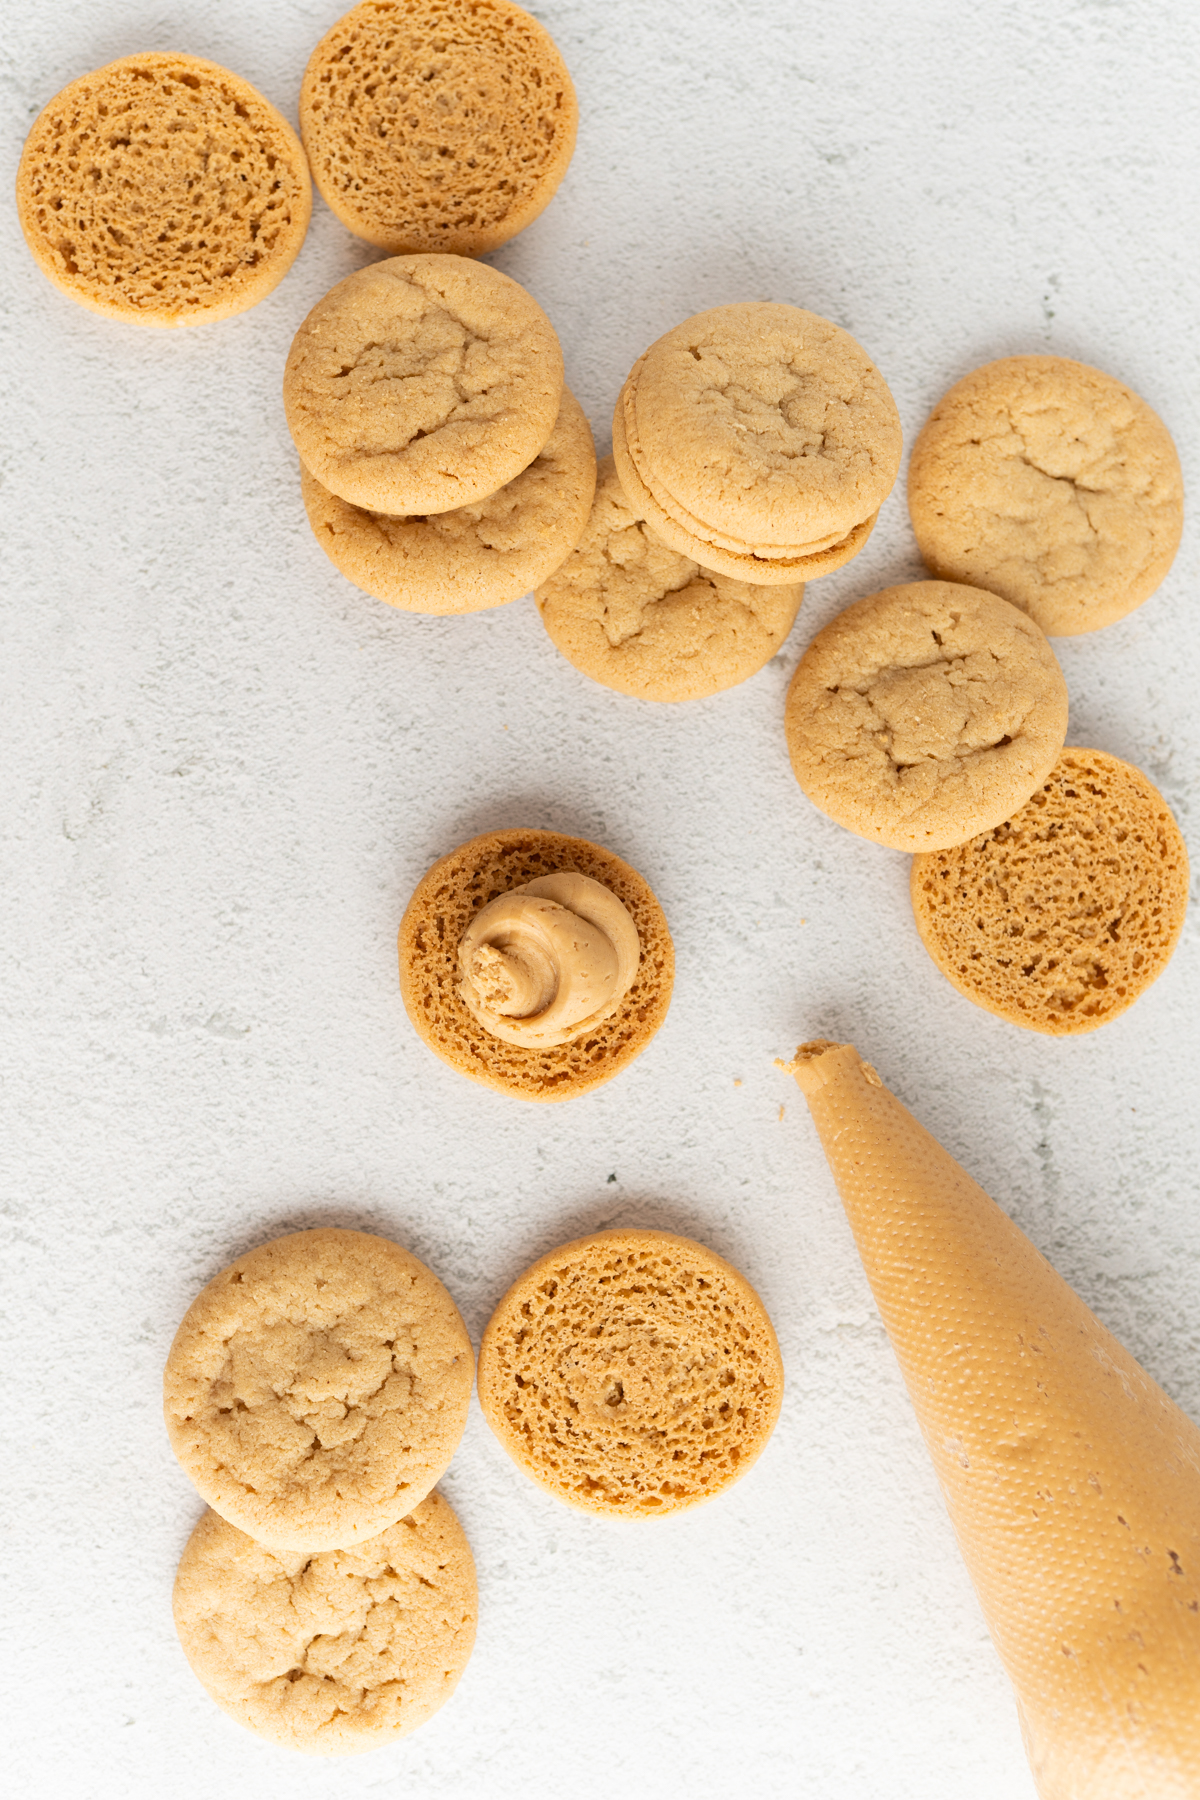 Aerial view of peanut butter cookies and a piping bag of peanut butter filling to make nutter butters. 